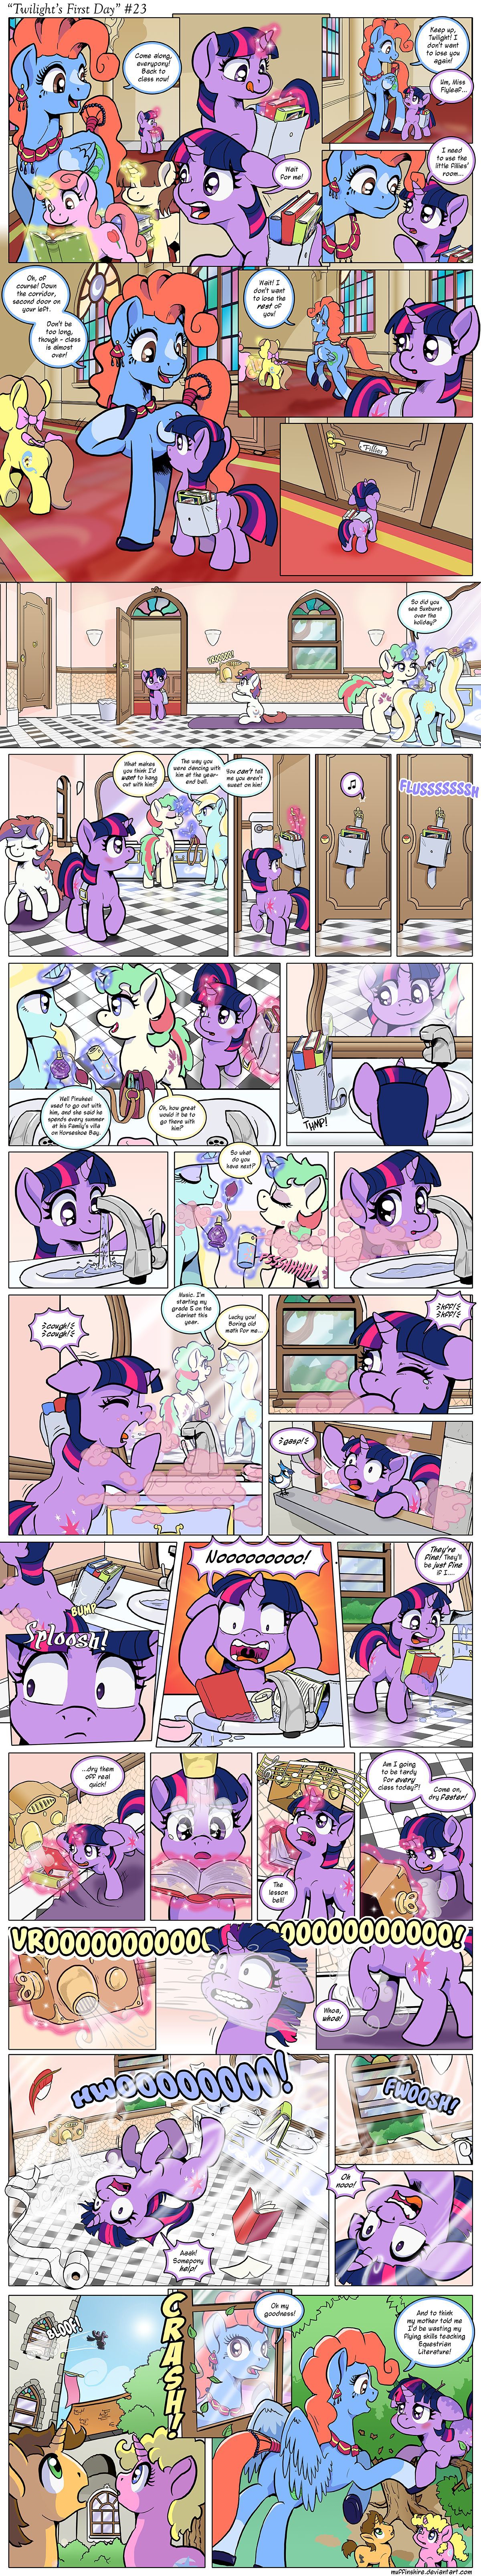 [Muffinshire] Twilight's First Day (My Little Pony: Friendship is Magic) [English] 23